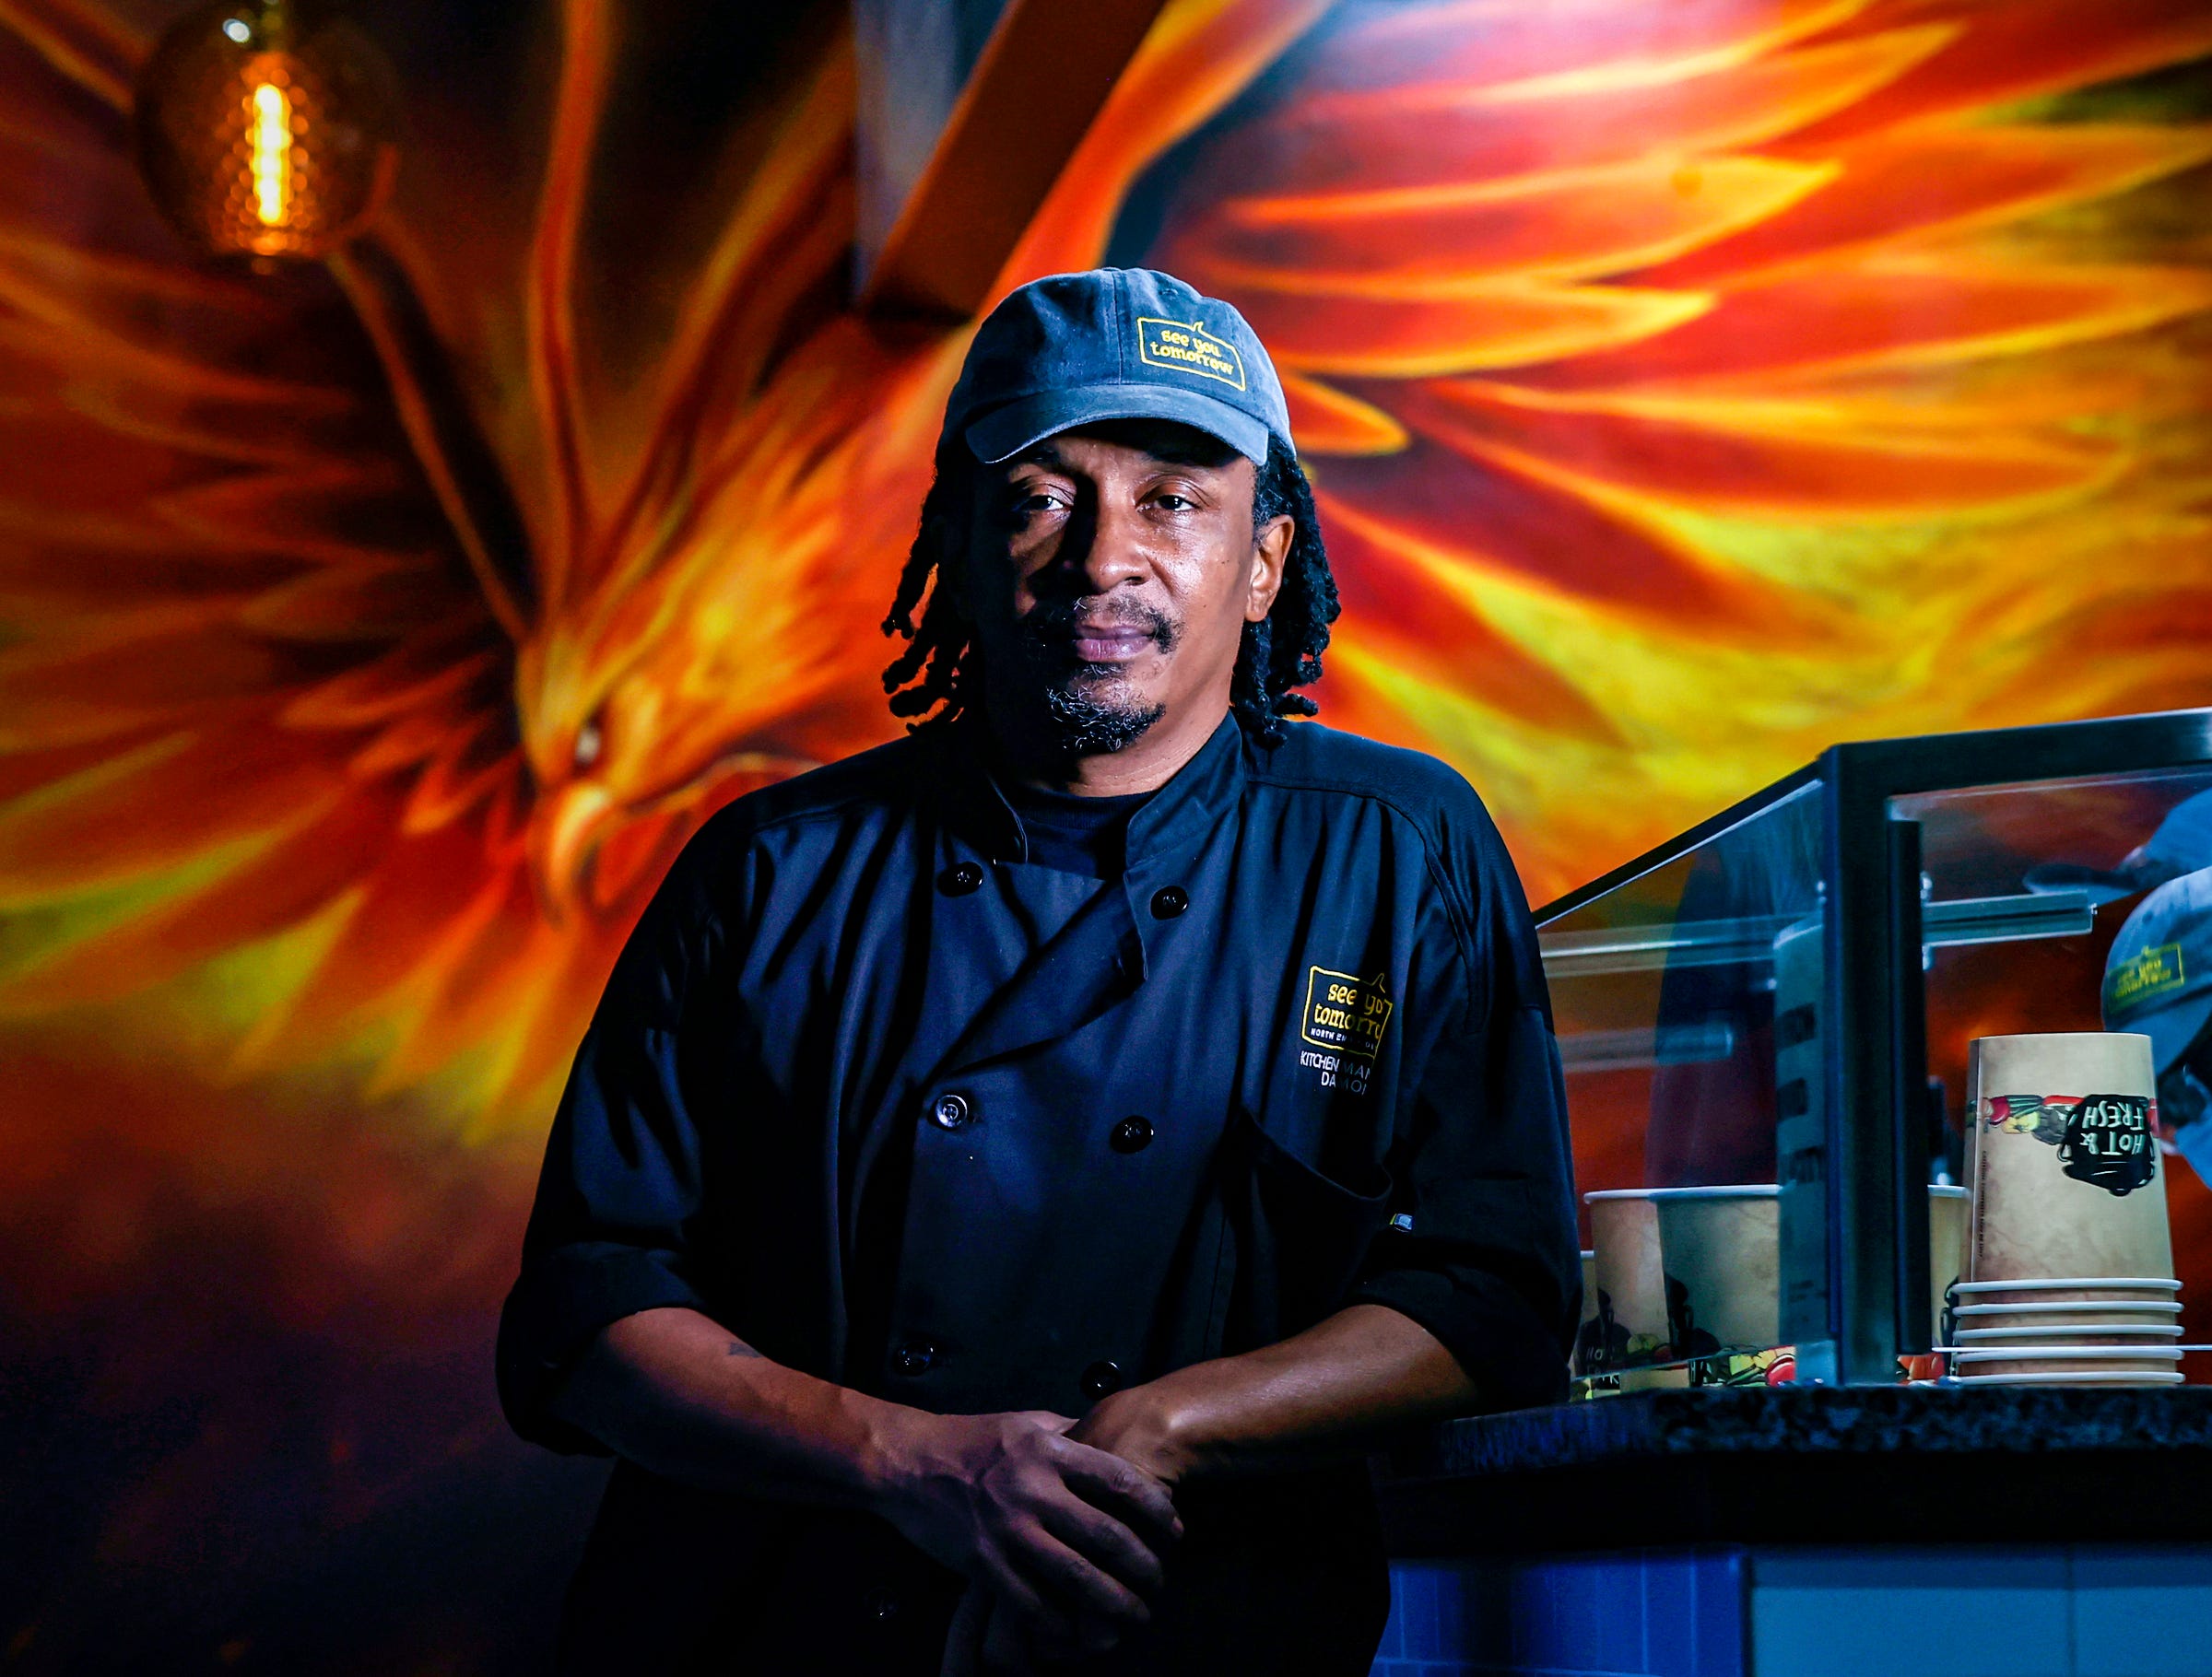 Damon Cann is the kitchen manager at See You Tomorrow, a restaurant on Woodward avenue that recently opened in New Center Detroit, Wednesday, Nov 30, 2022.
Cann was a cook at a Birmingham restaurant, but after disagreements with his boss there he left to work at this restaurant not far from where he grew up.